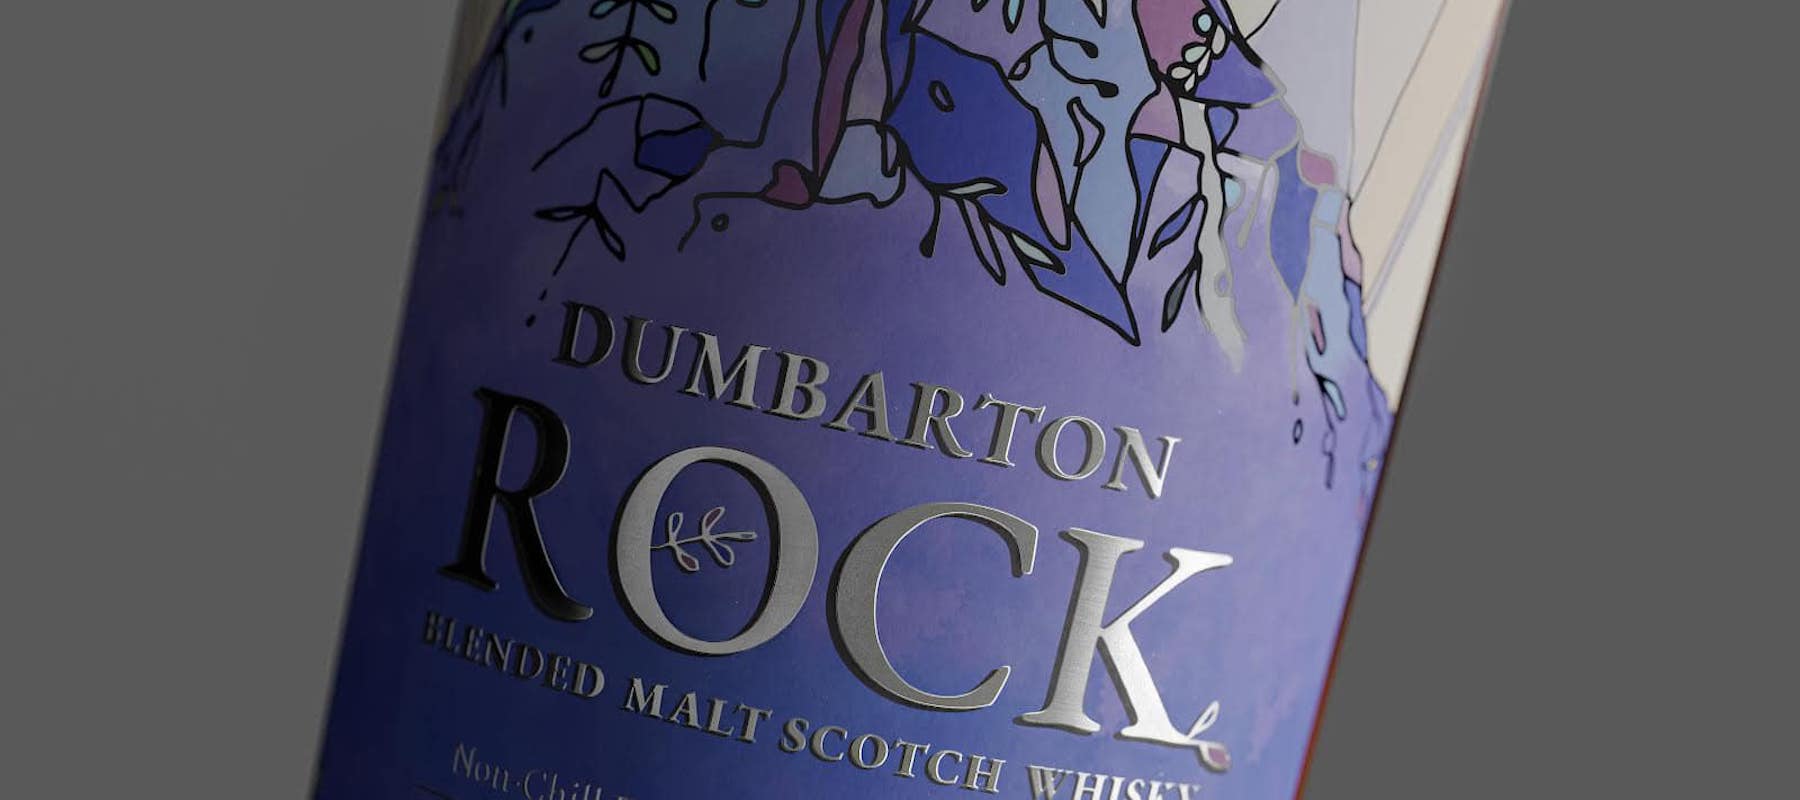 Whisky Under £50 Review 18: Dumbarton Rock